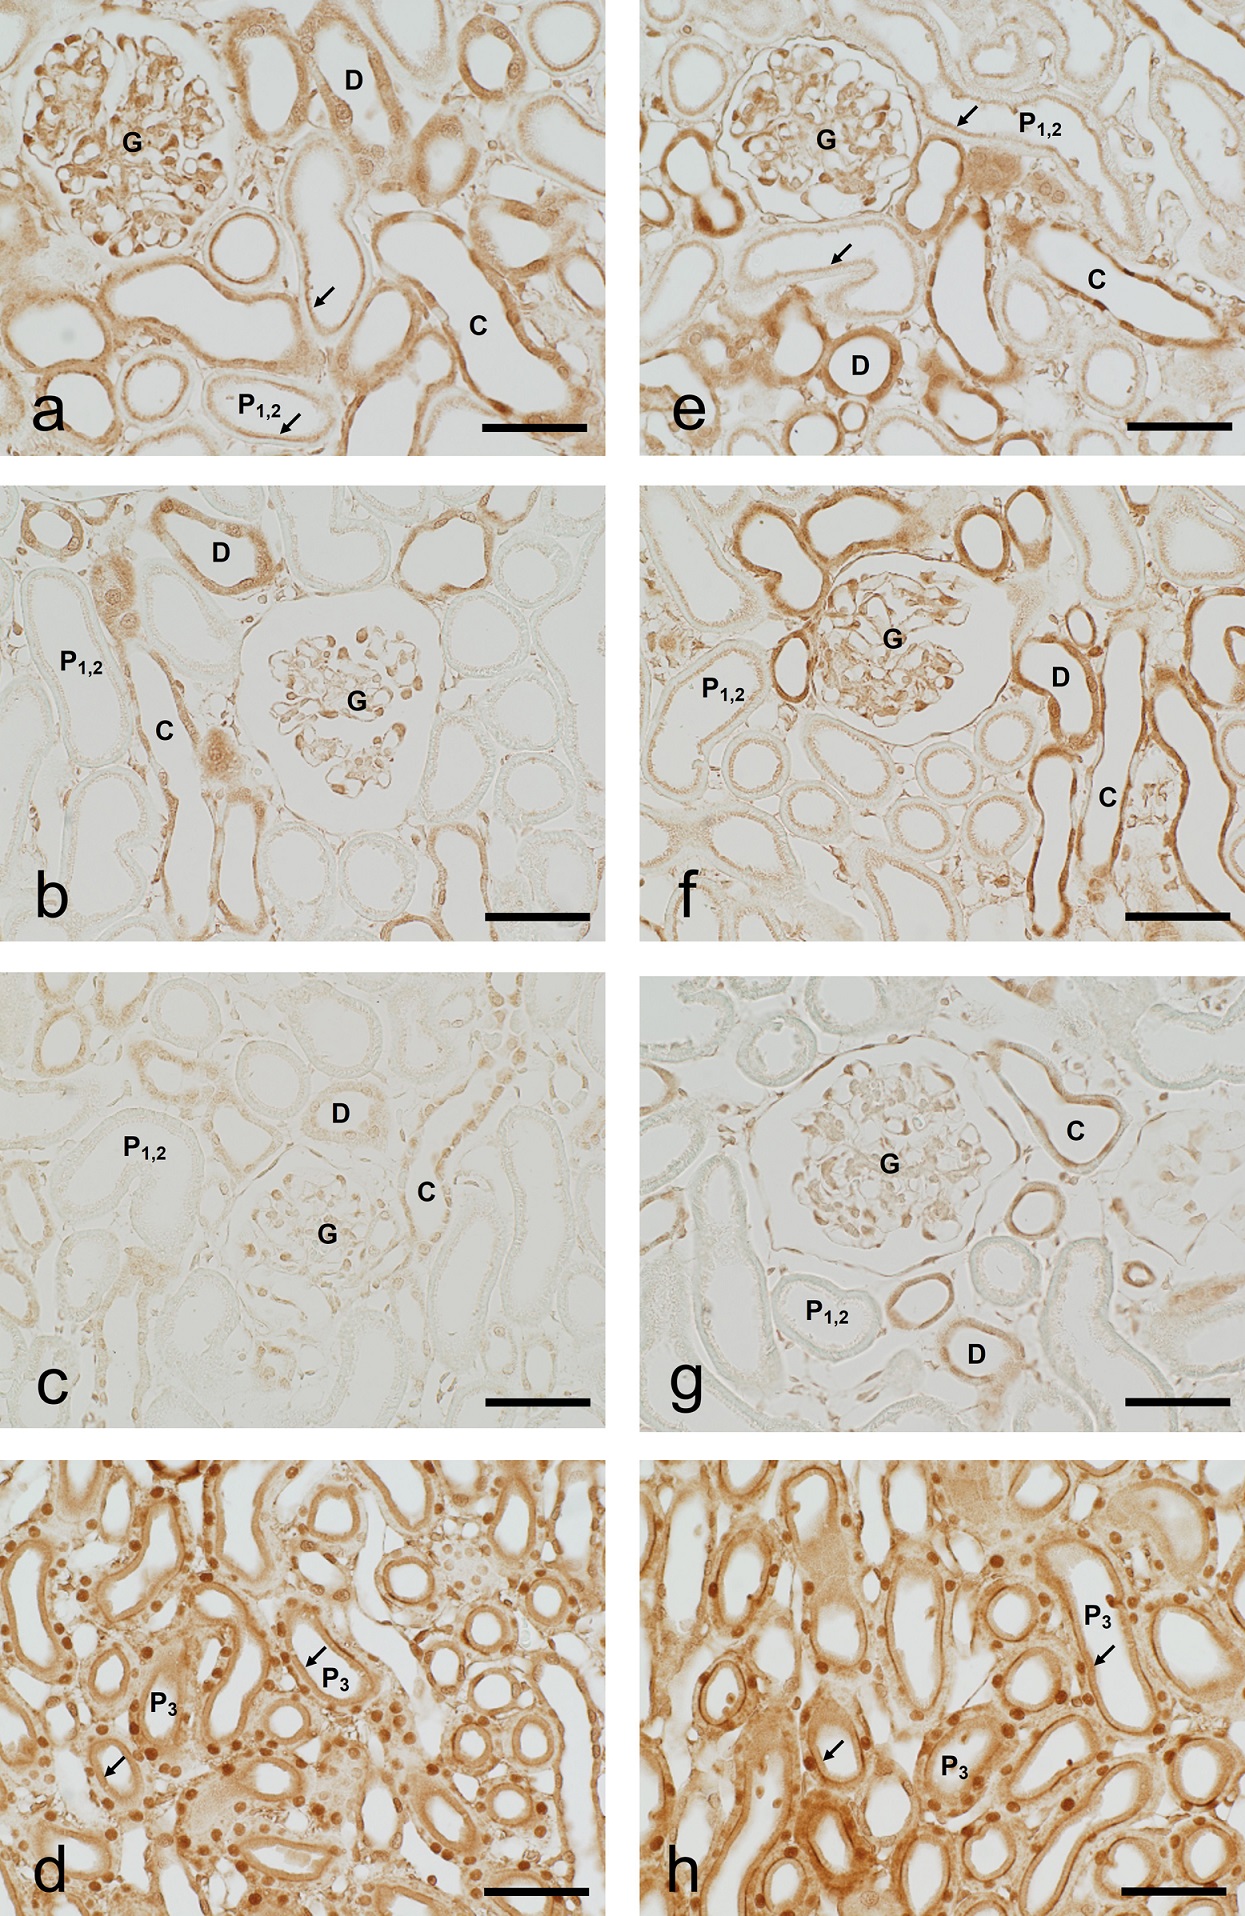 Immunohistochemical Localization of Alogliptin, a DPP-4 Inhibitor, in Tissues of Normal and Type 2 Diabetes Model Rat